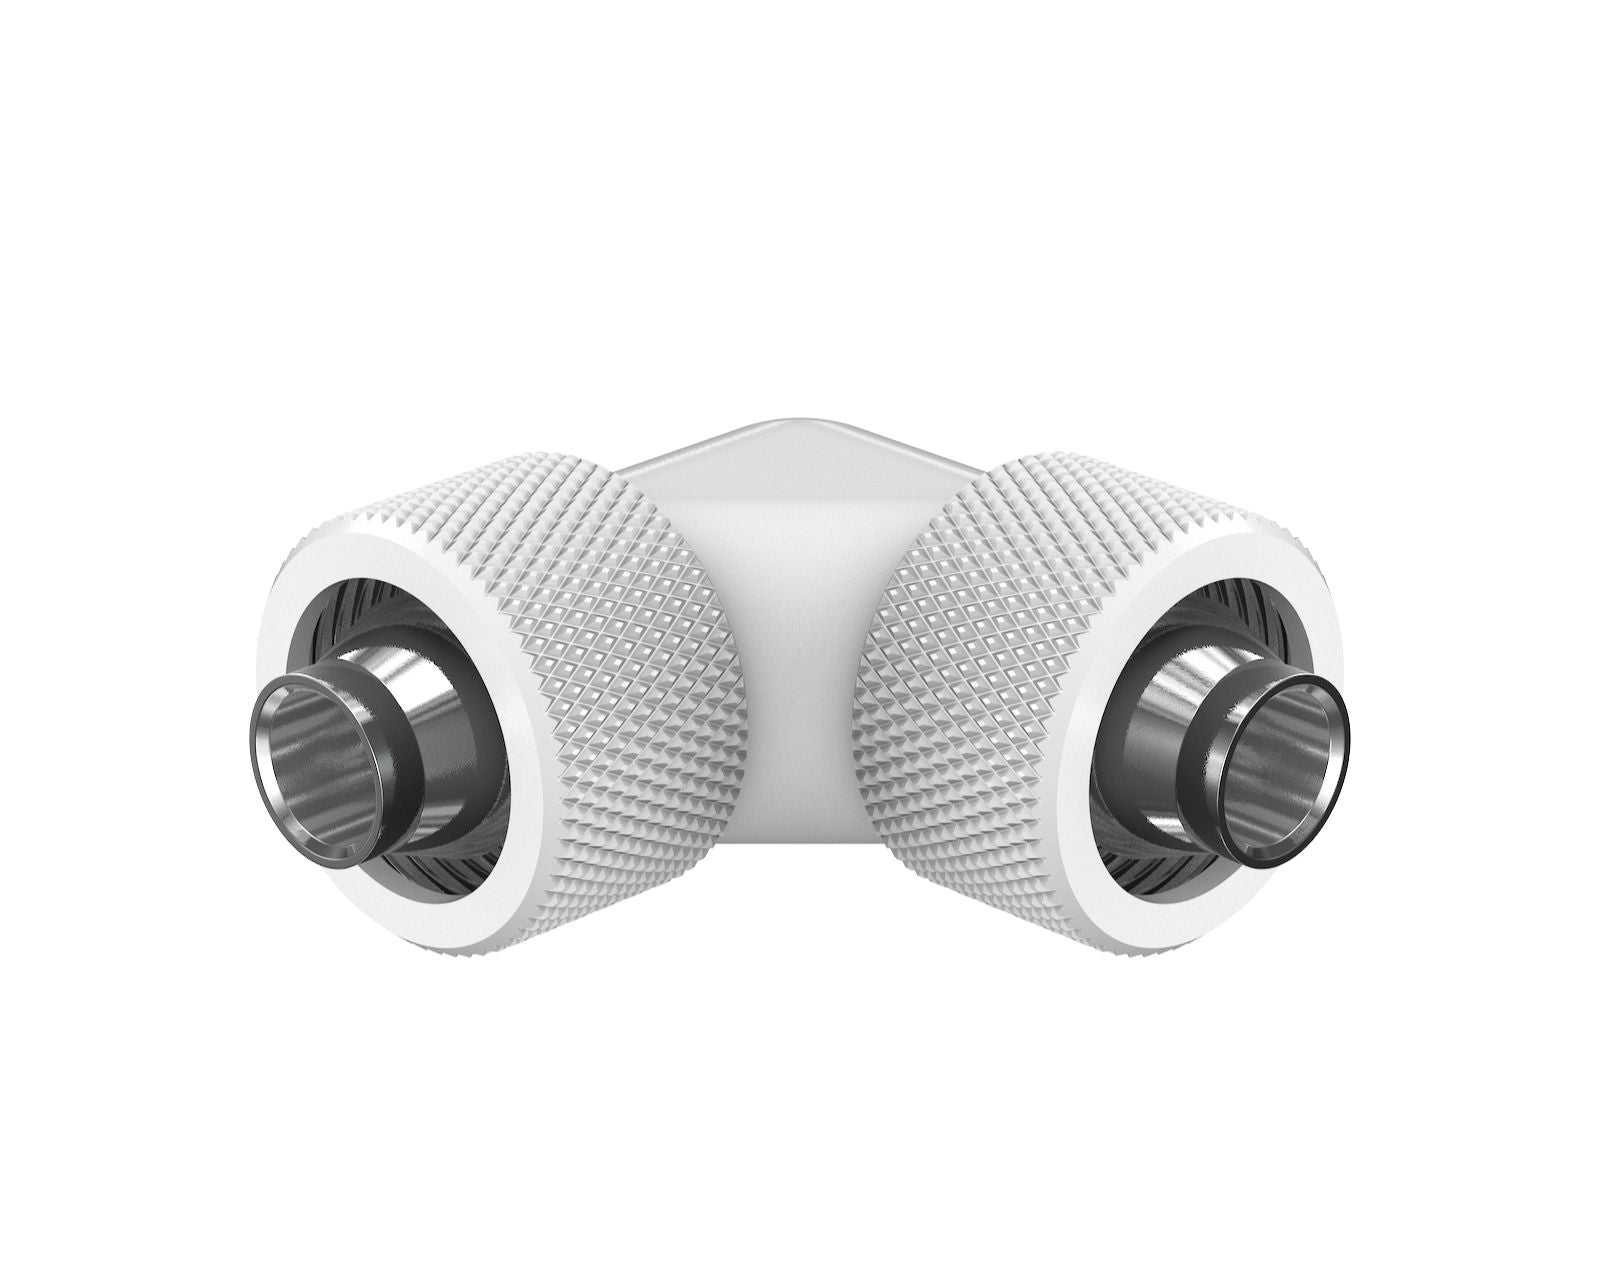 PrimoChill SecureFit SX - Premium 90 Degree Compression Fitting Set For 3/8in ID x 5/8in OD Flexible Tubing (F-SFSX5890) - Available in 20+ Colors, Custom Watercooling Loop Ready - Sky White